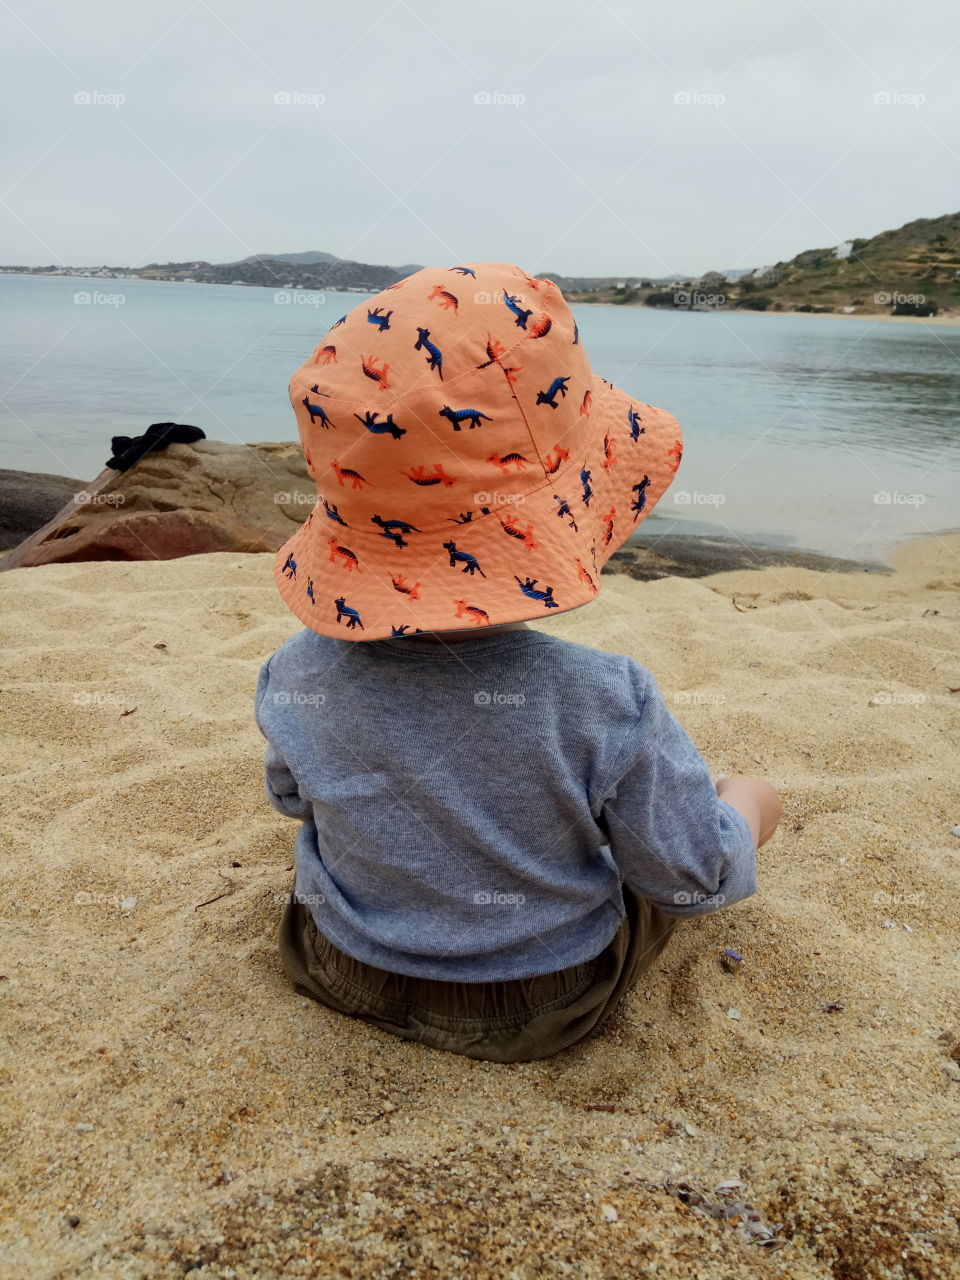 baby on the beach in summer time with a hut